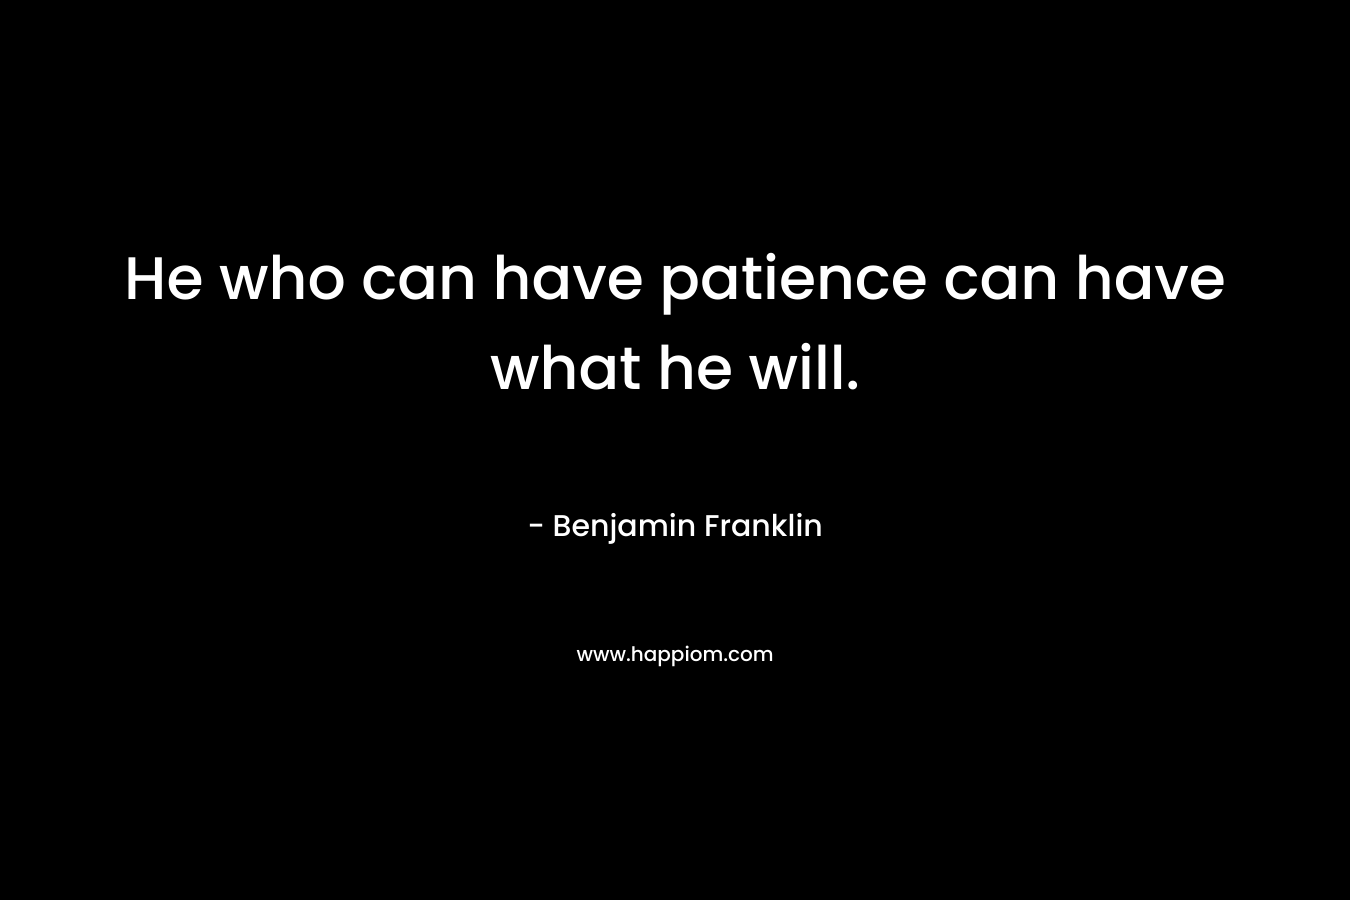 He who can have patience can have what he will. – Benjamin Franklin